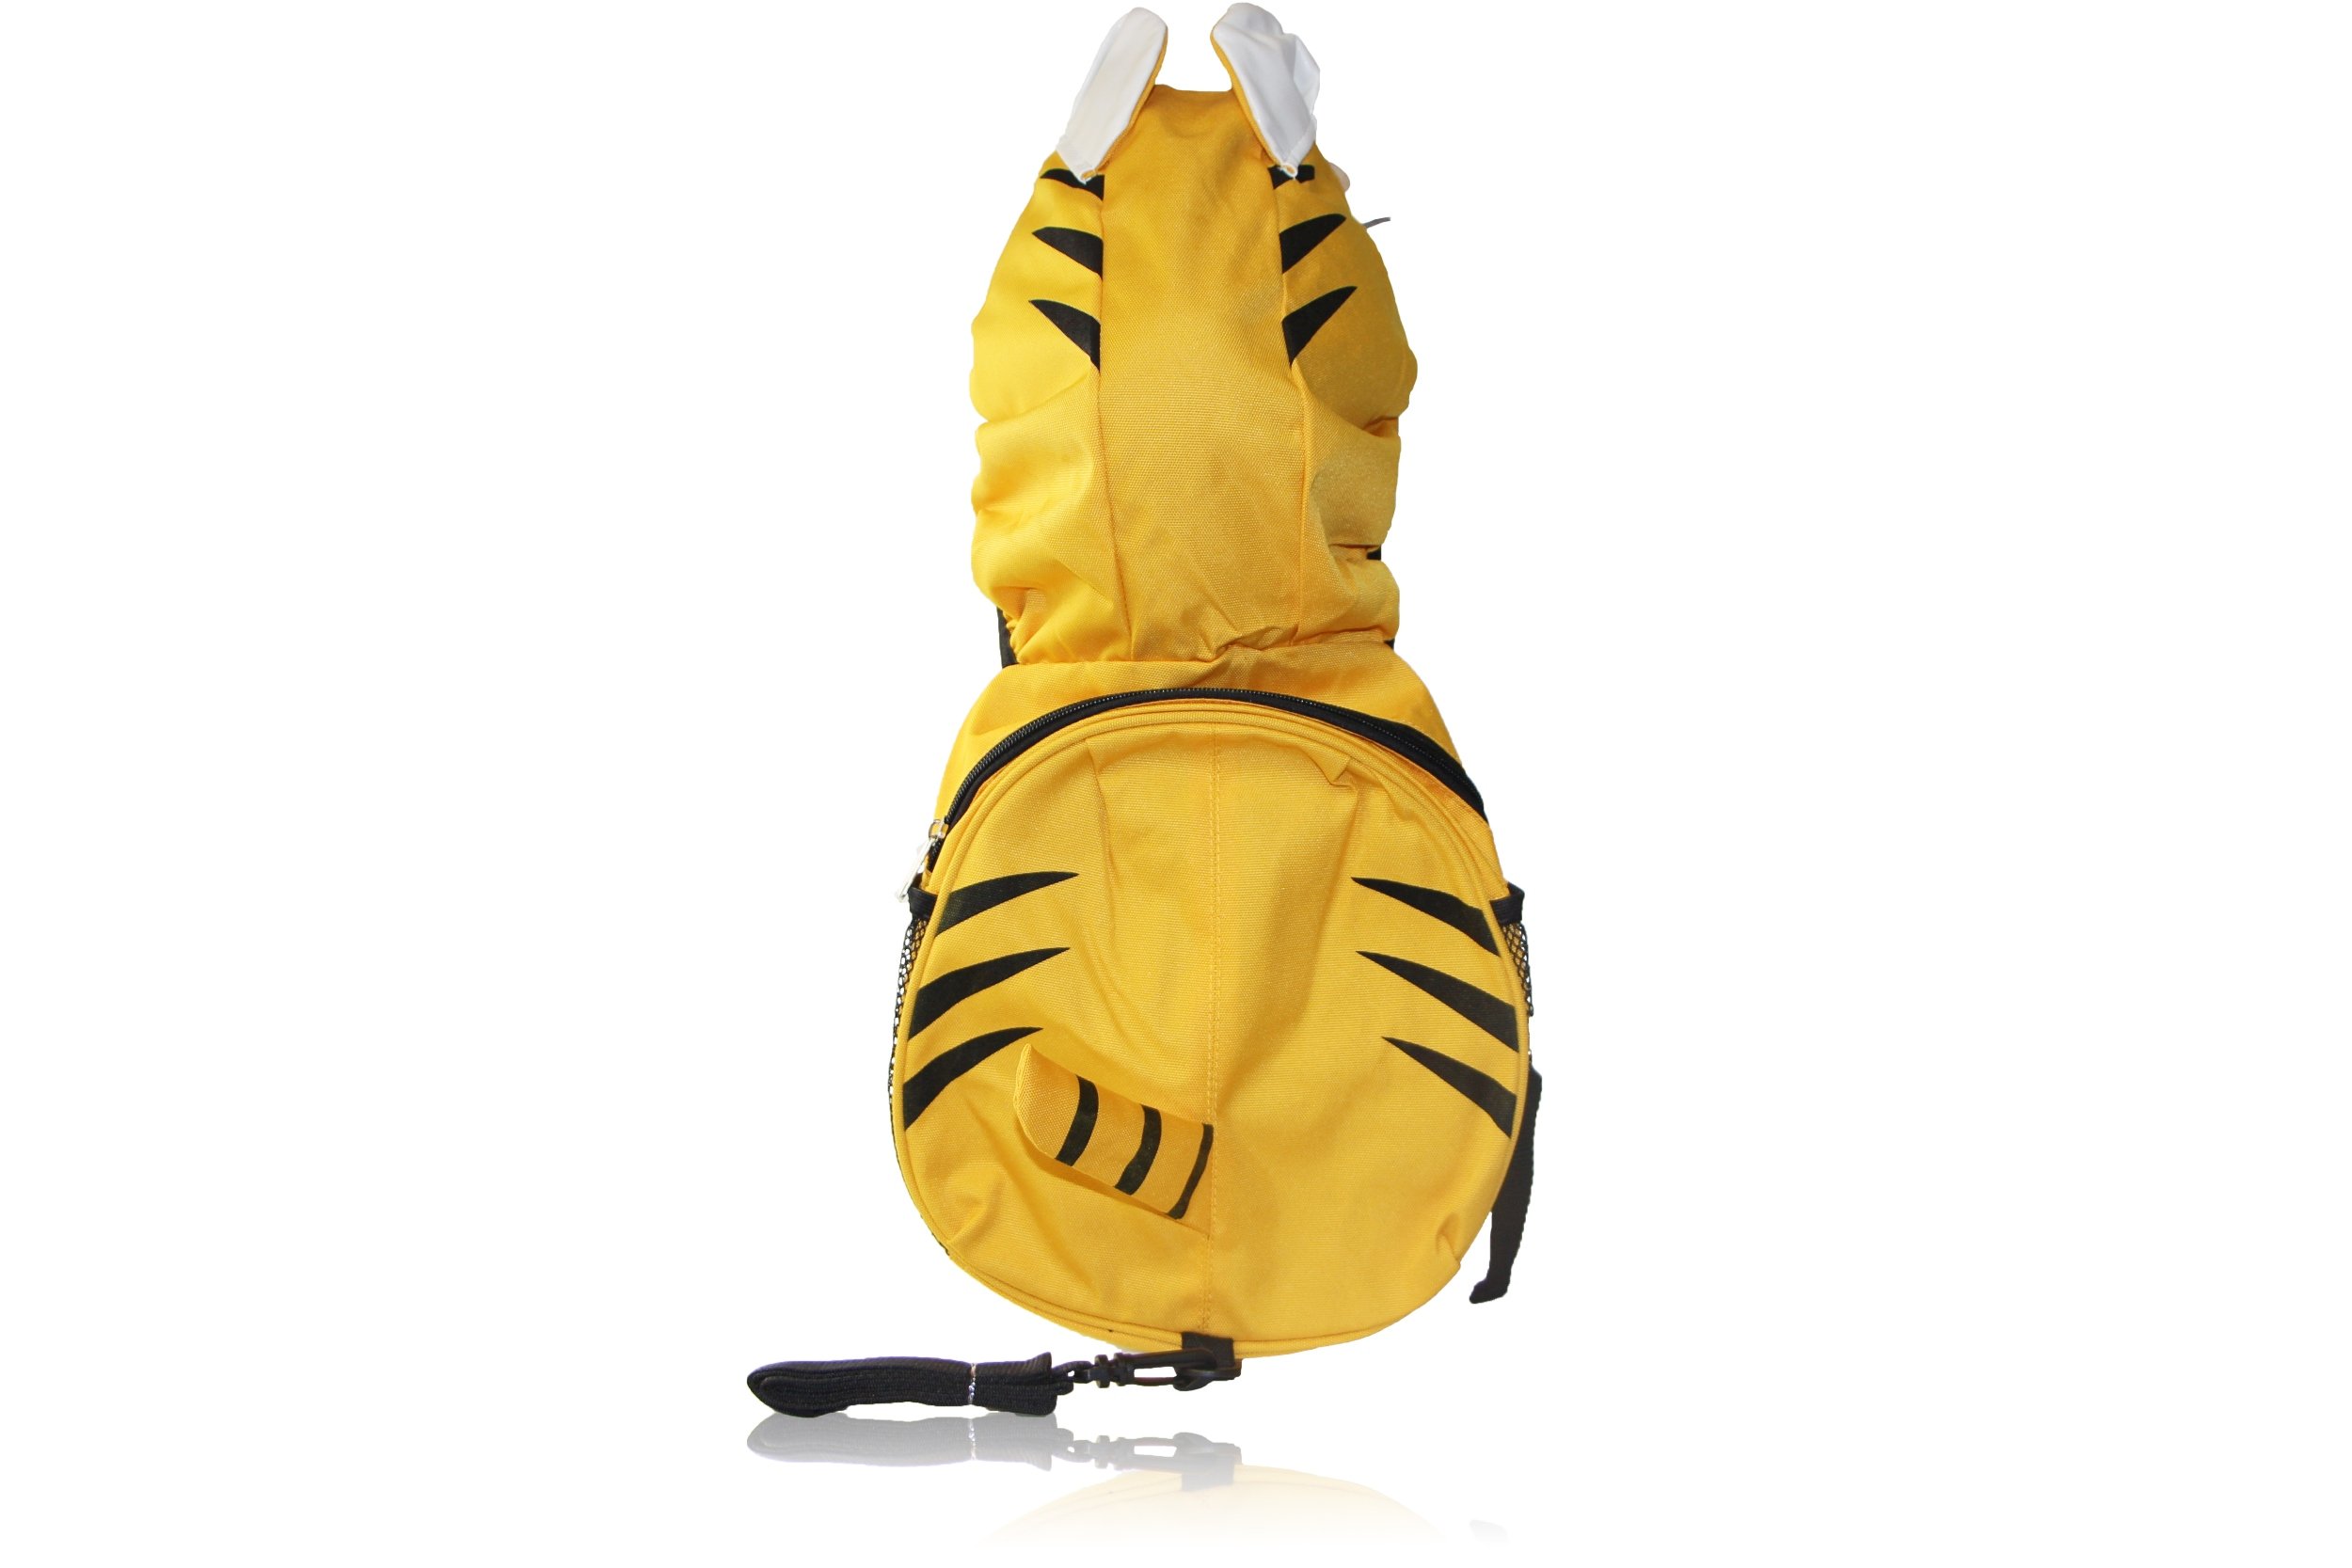 Animal Baby Backpack with Hat Cap, by-My-Side Child Leash, Breathable, Compact, Adorable, Strong, Durable, Comfortable, Washable, Baby Walking Safety Harness, Backpack Reins (Giraffe)